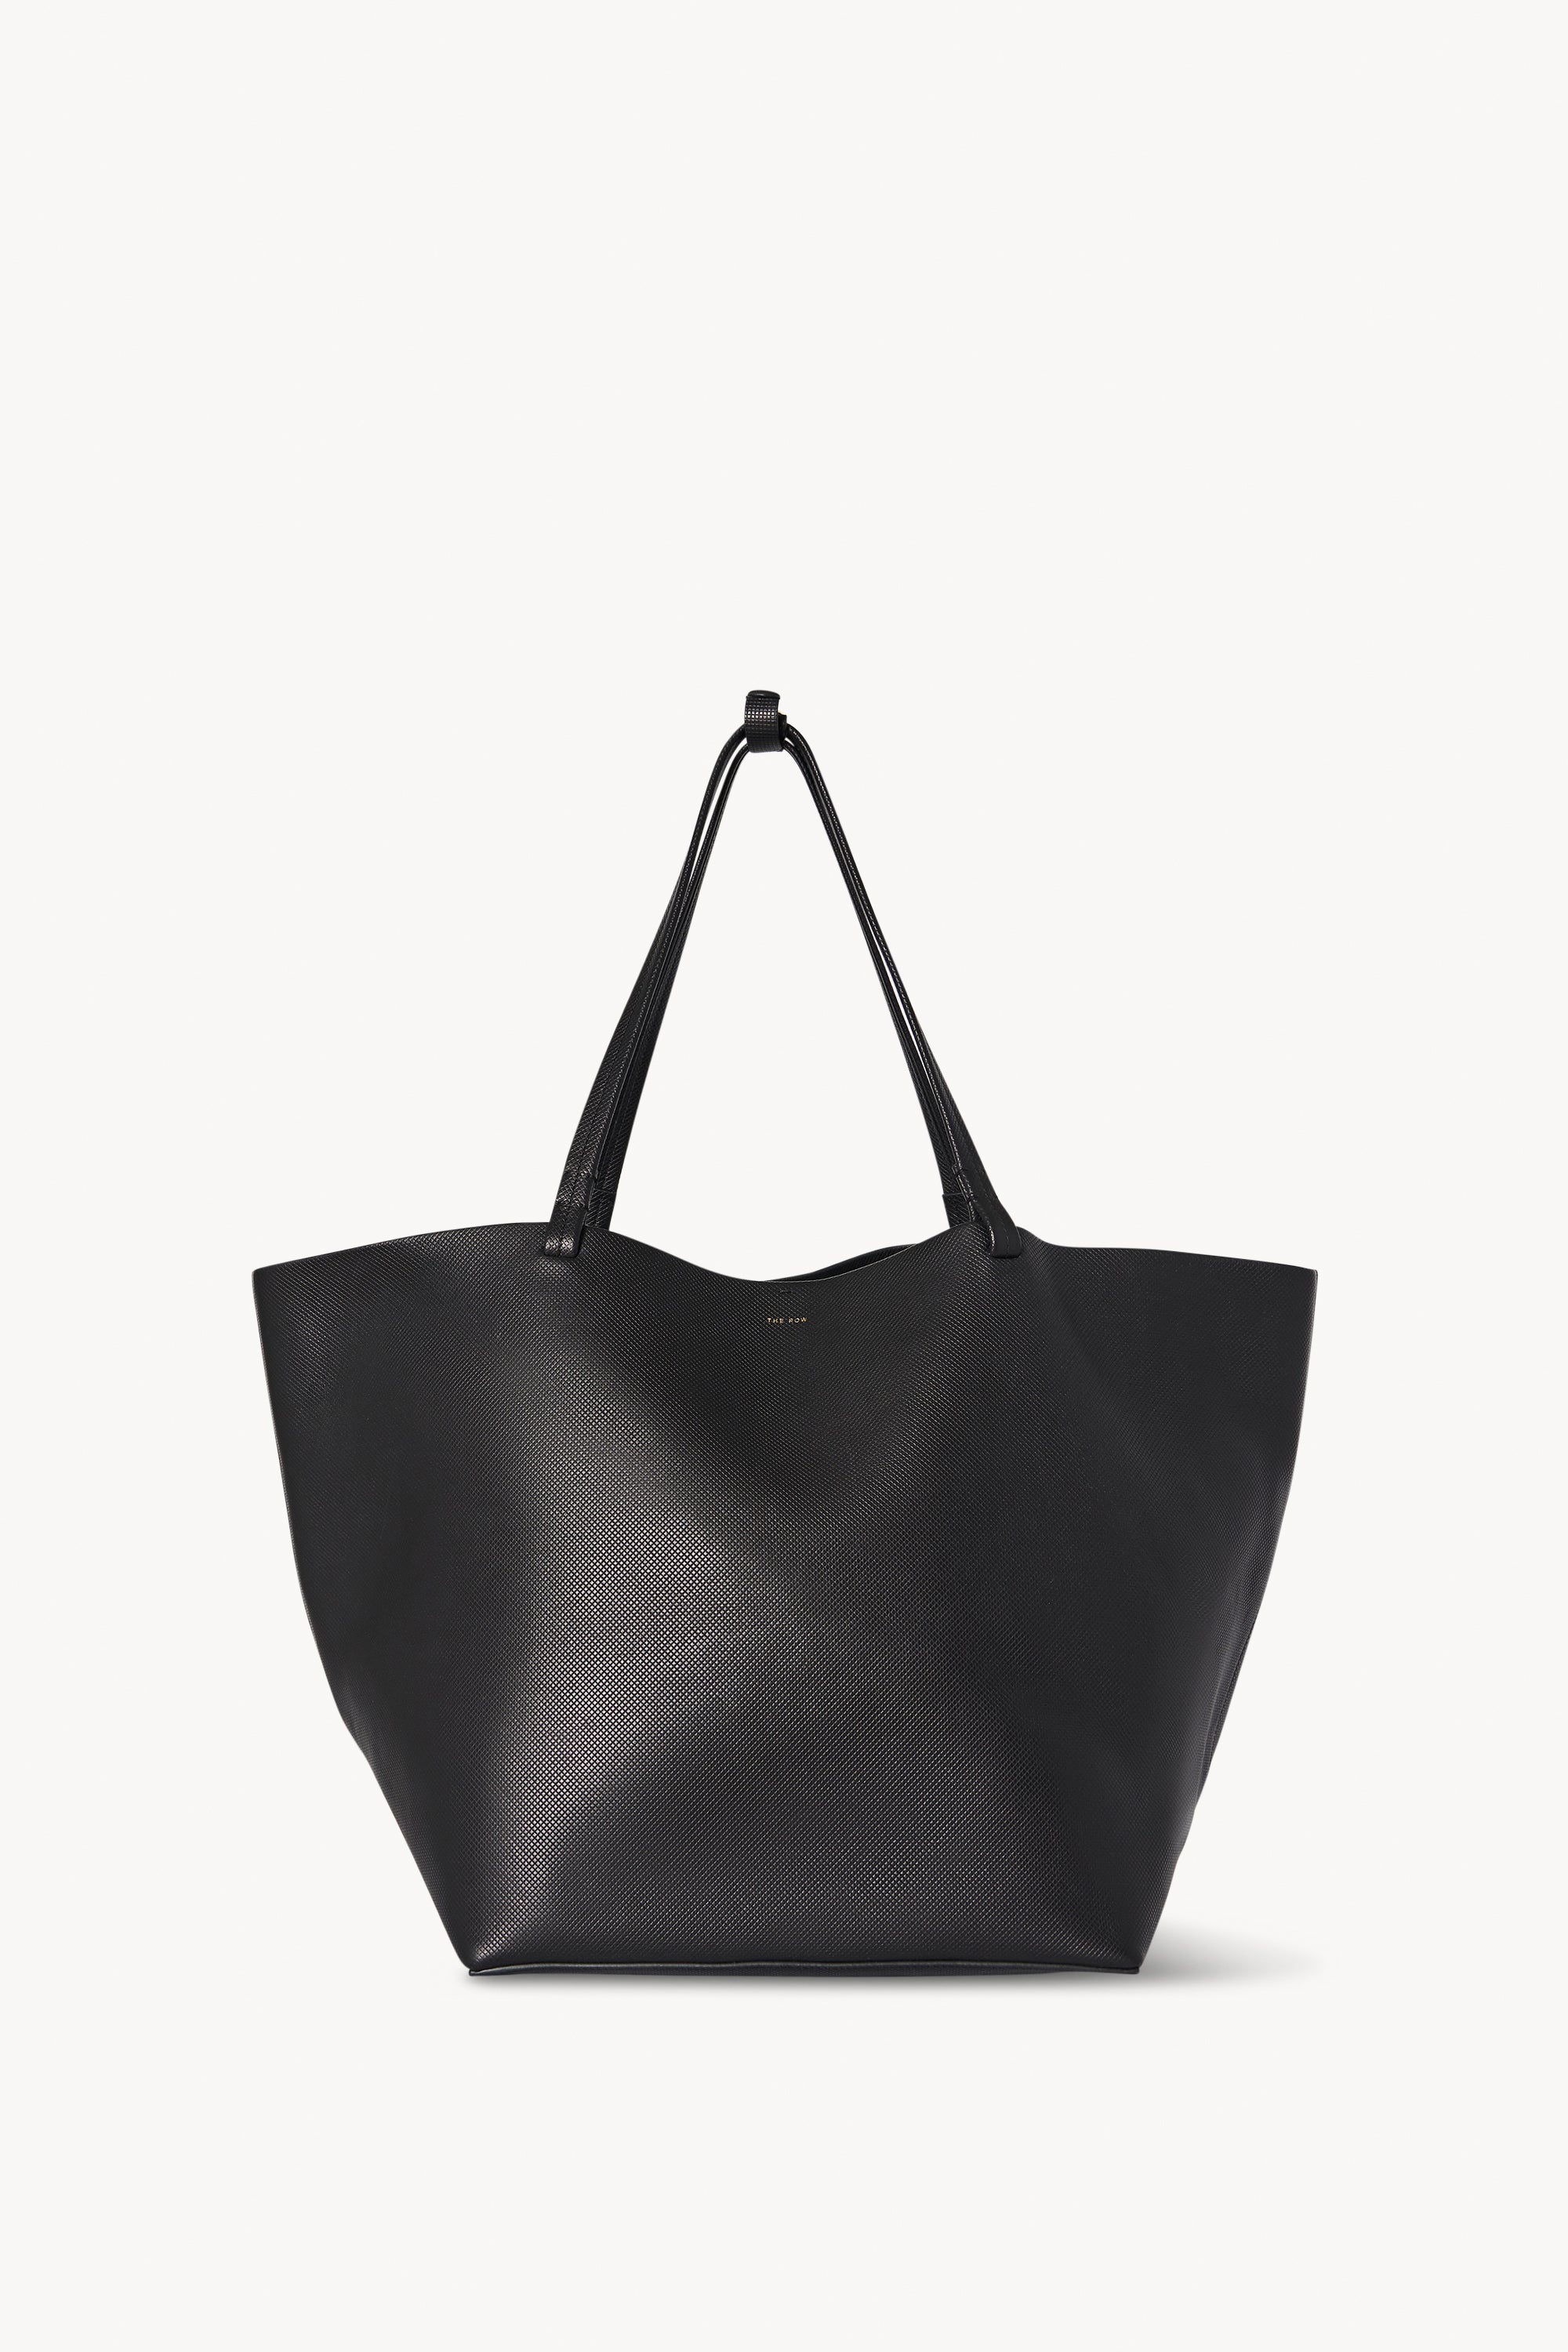 Park Tote Three Bag in Leather - 1